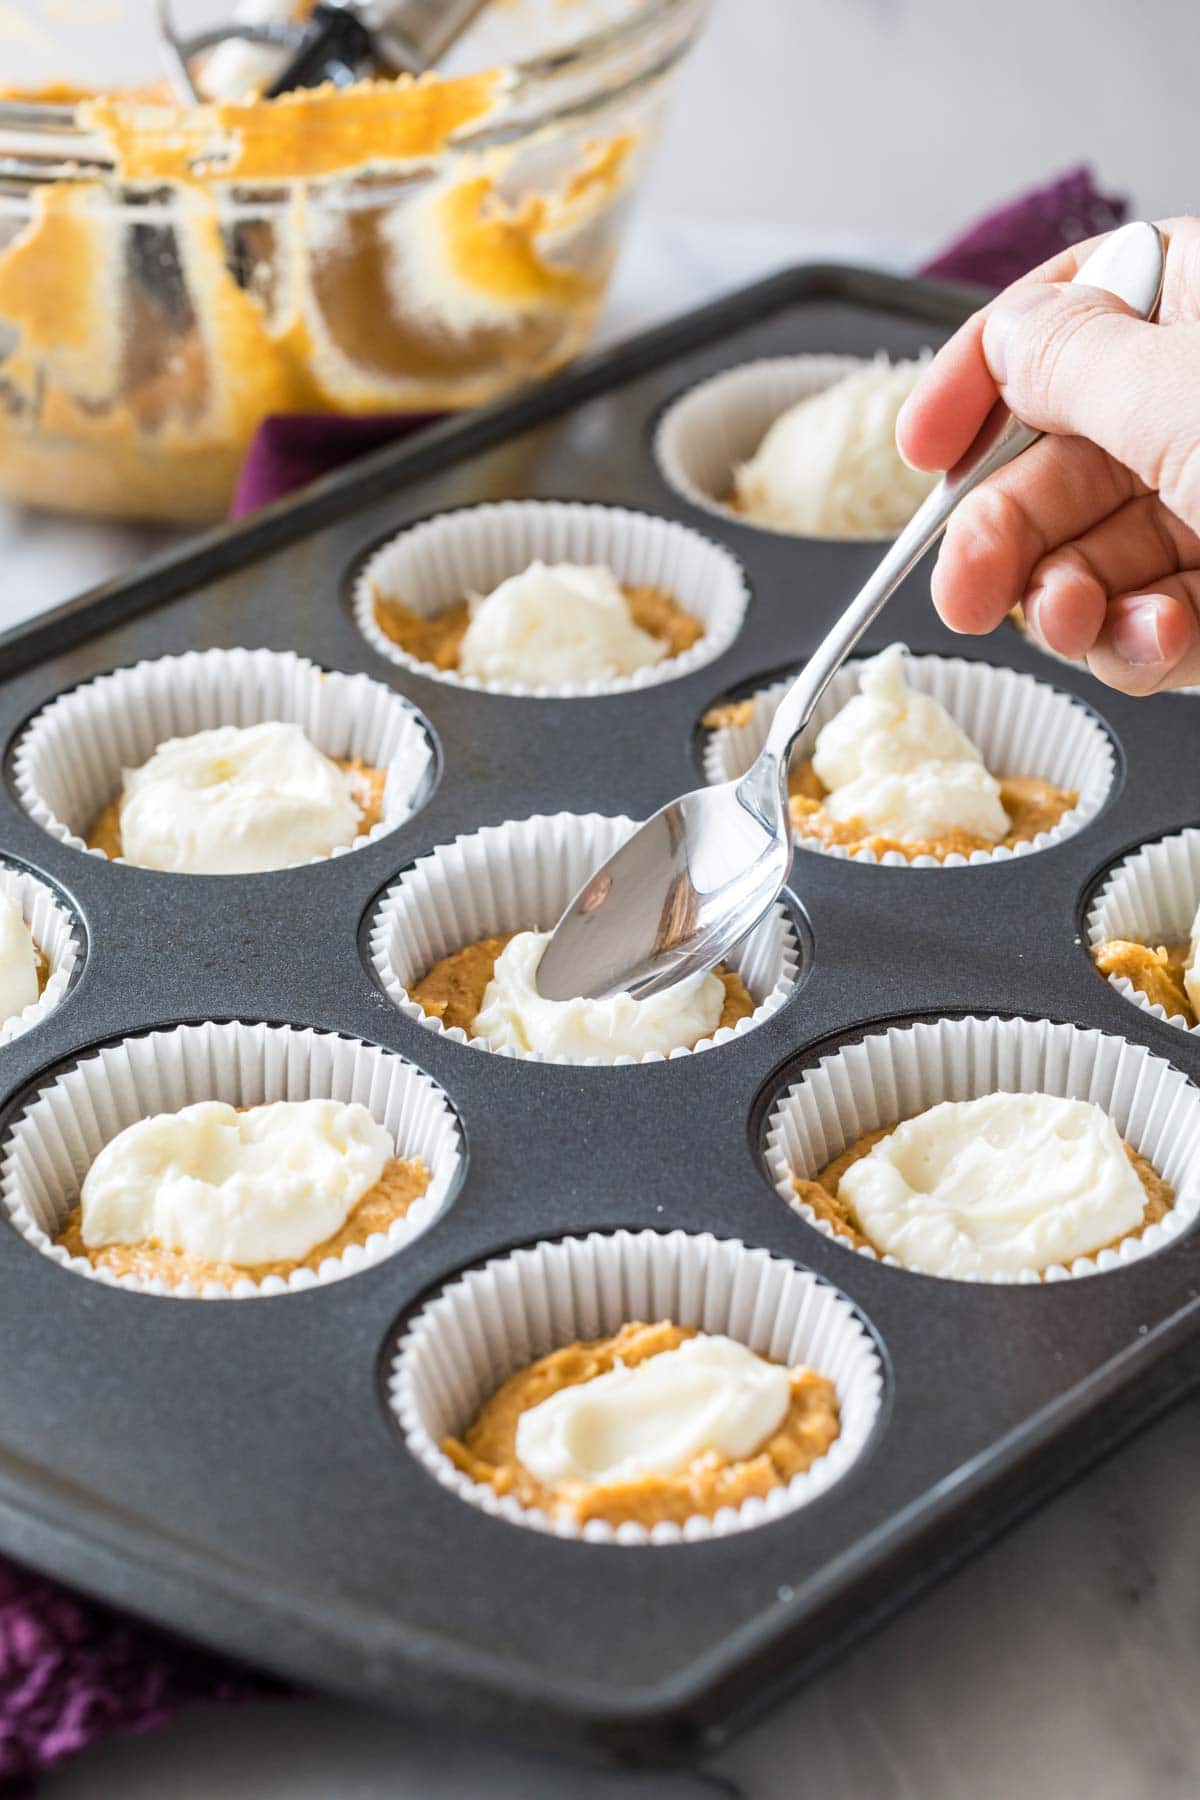 spoon adding a cheesecake filling to unbaked pumpkin muffins